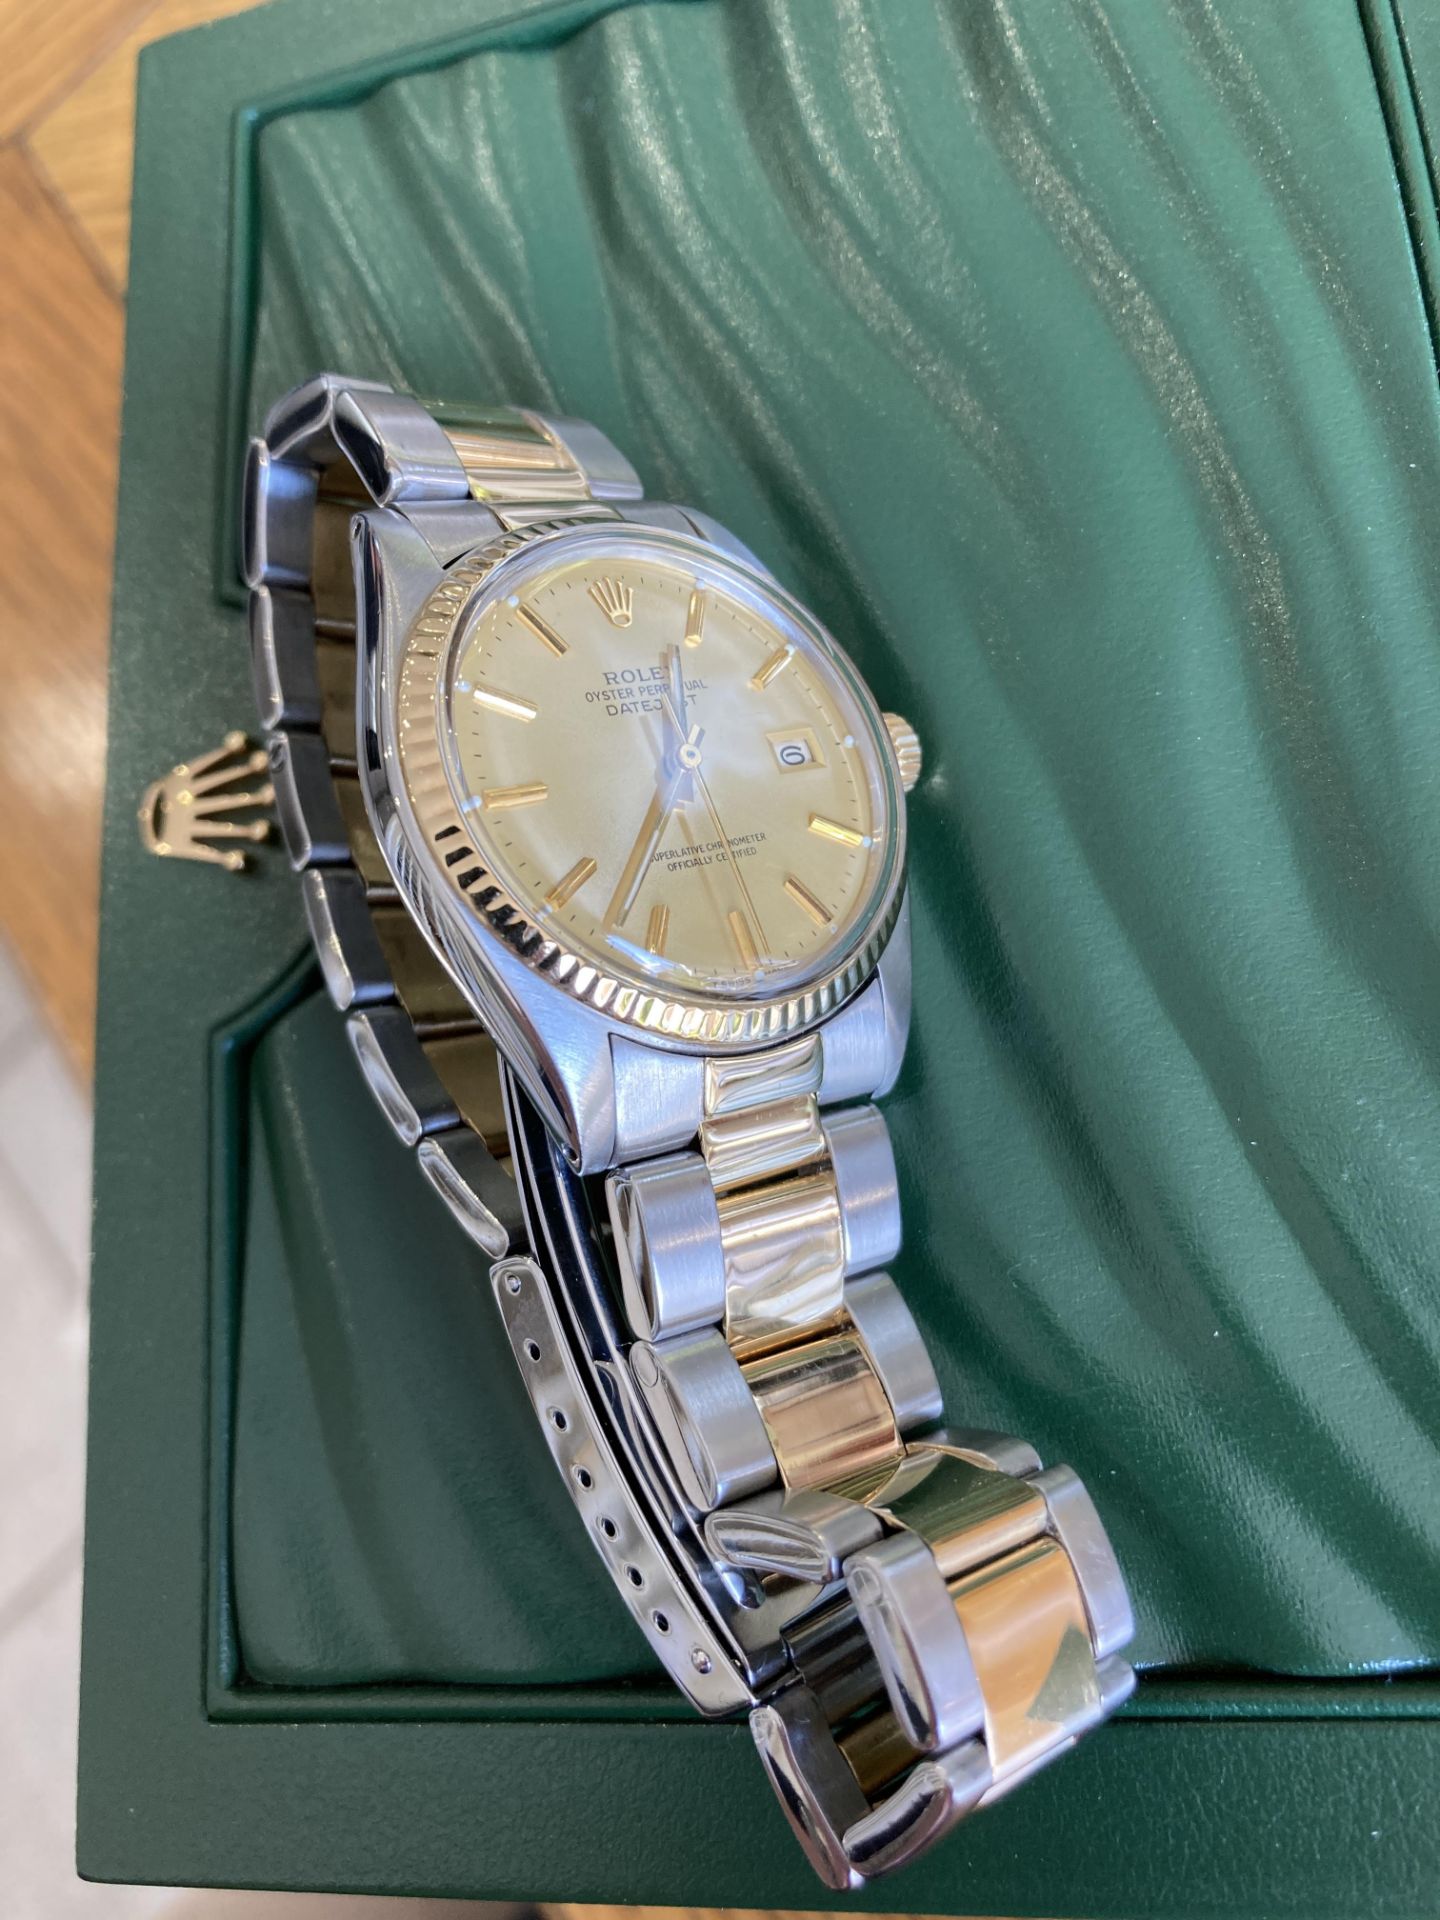 ROLEX DATEJUST 36MM, BIMETAL STAINLESS STEEL & 18CT YELLOW GOLD, CHAMPAGNE DIAL - BOX NOT INCLUDED - Image 6 of 11